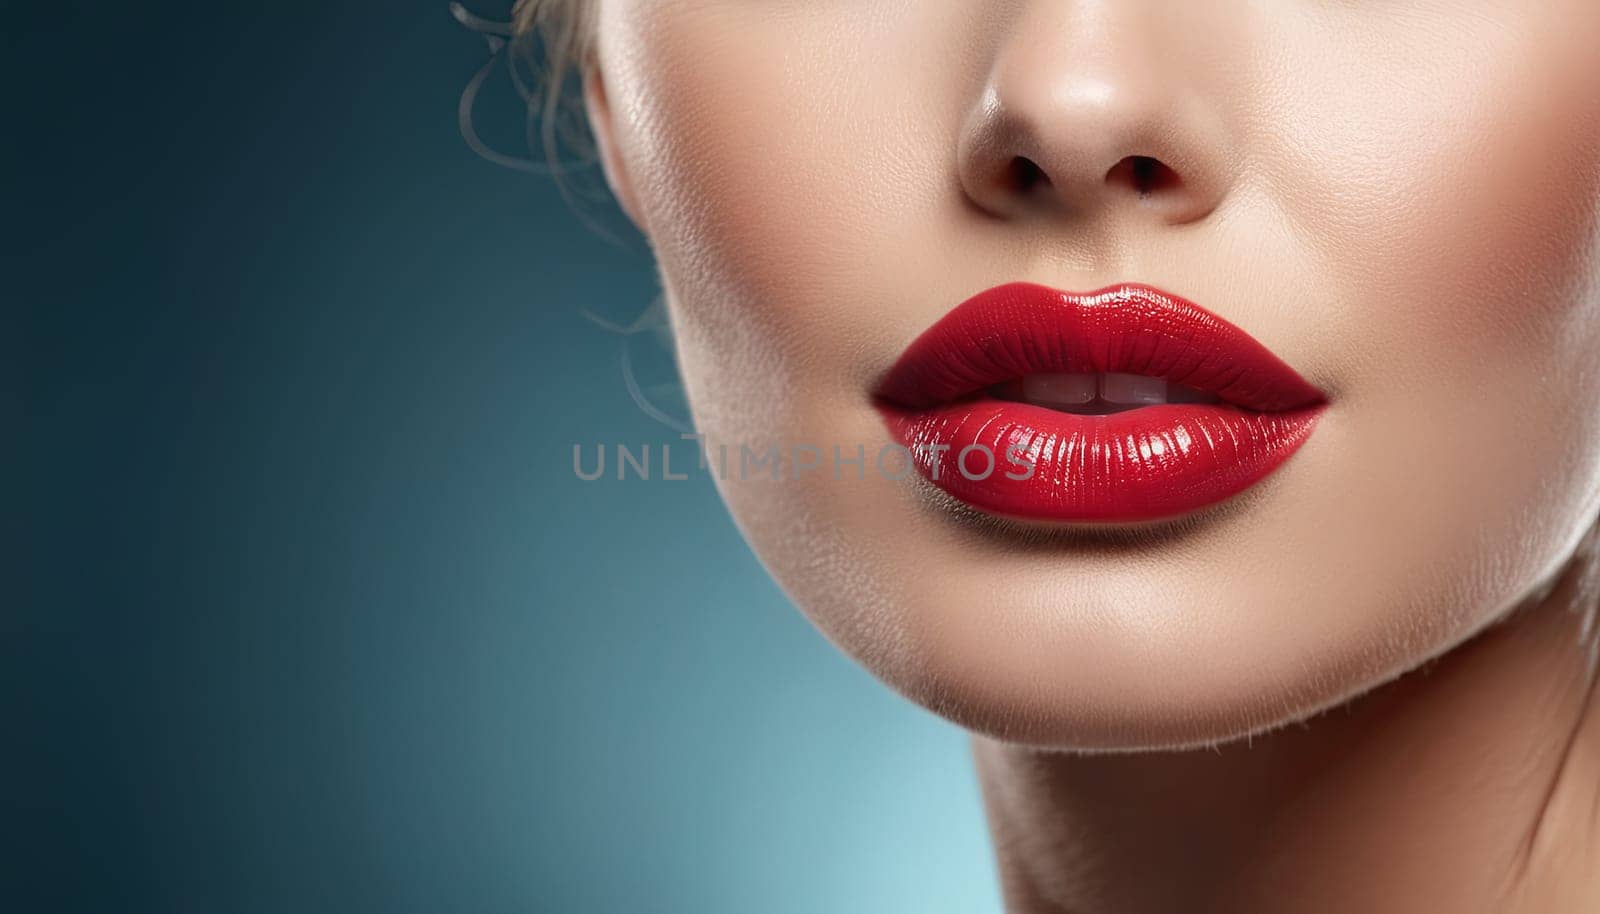 Close-up woman lower face, showcasing clear complexion against a blue background. Image captures detail of skin texture, lips, used for skin care promotion. by Matiunina